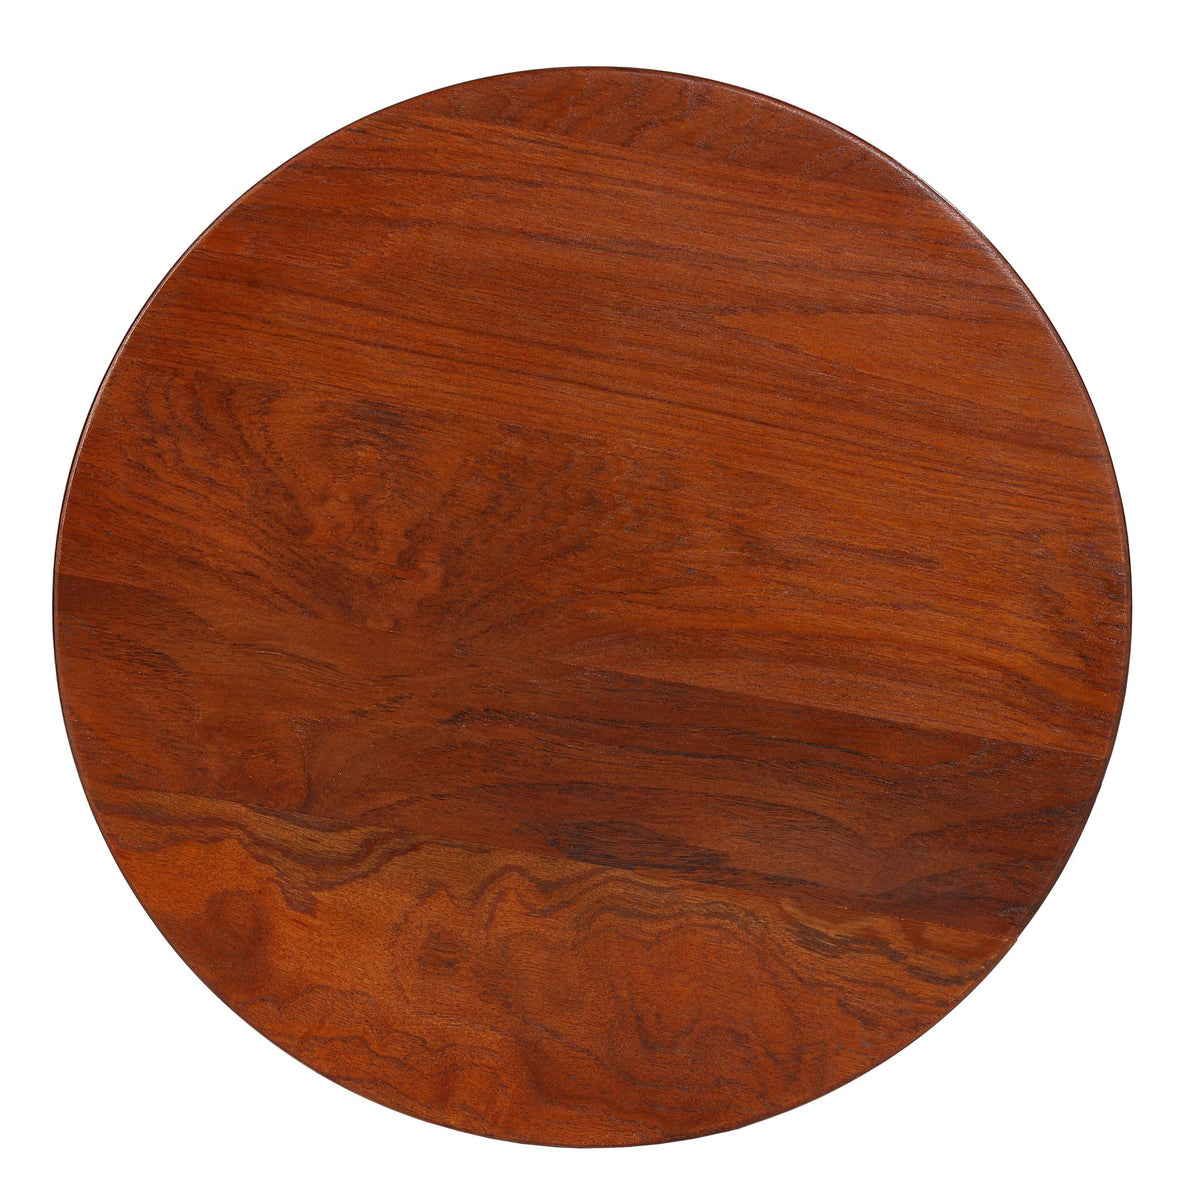 Bare Decor Mares Round Accent Table in Solid Teak Wood 18x18x18